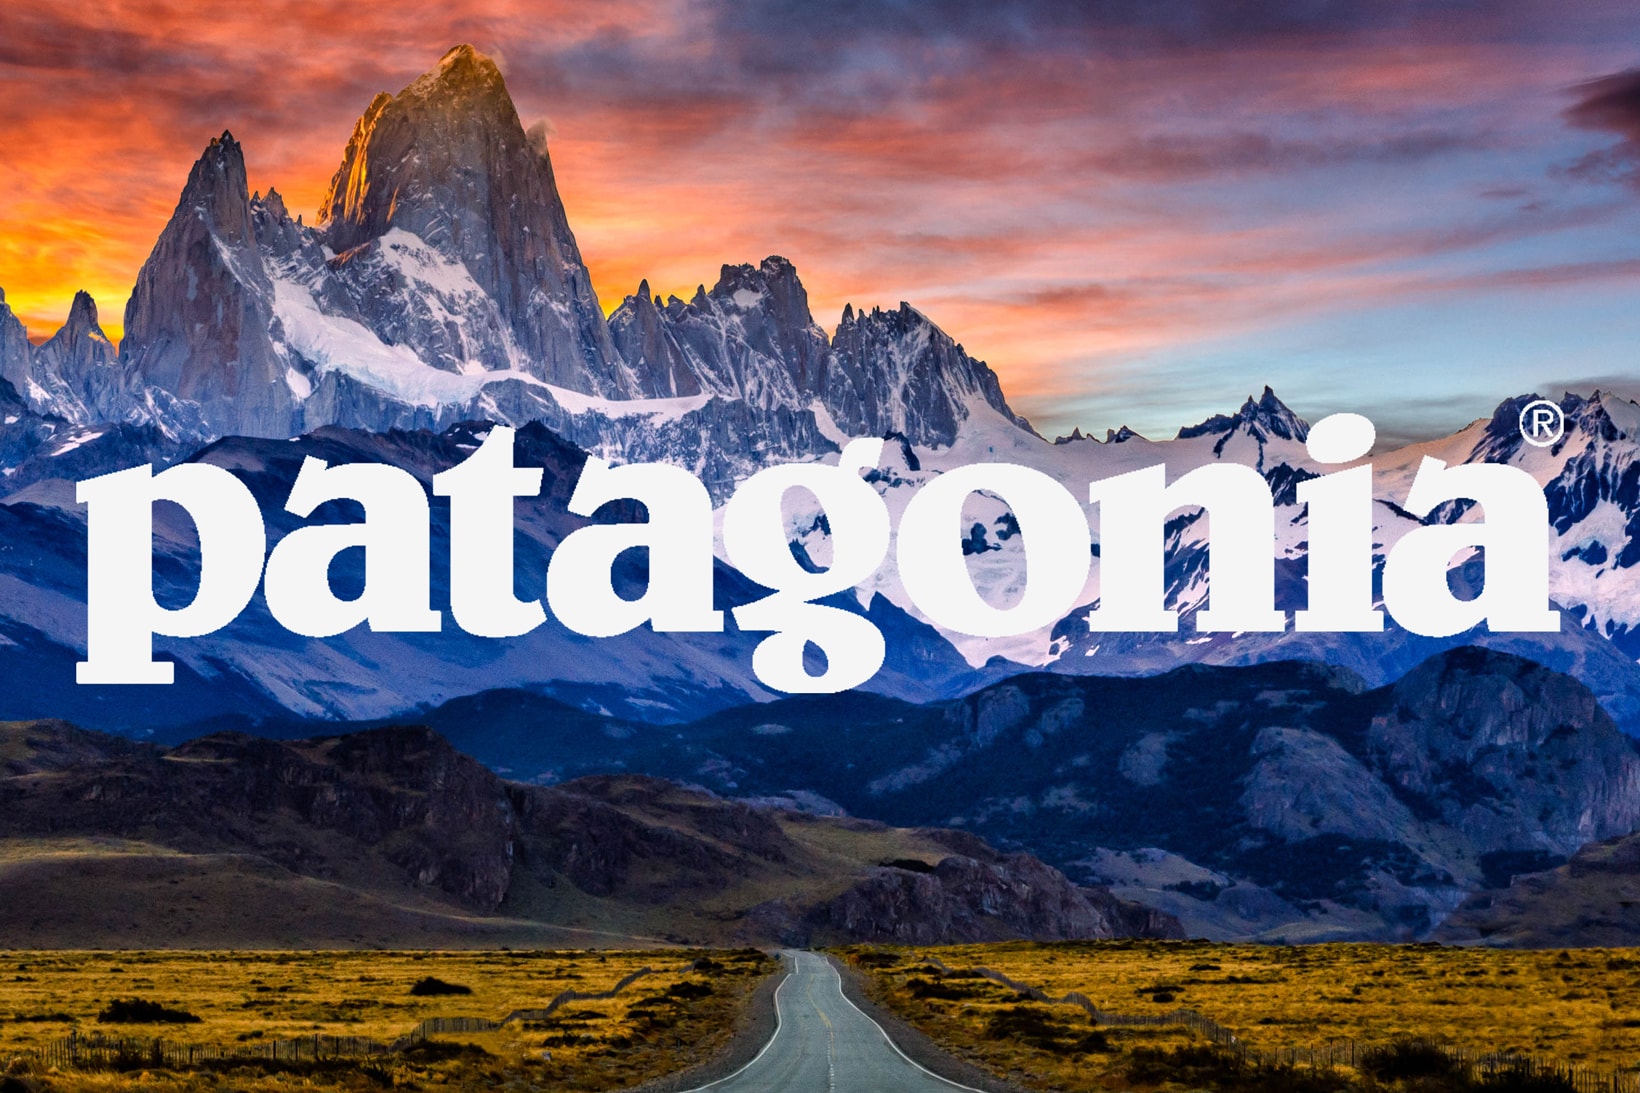 New partnership with outdoor company Patagonia